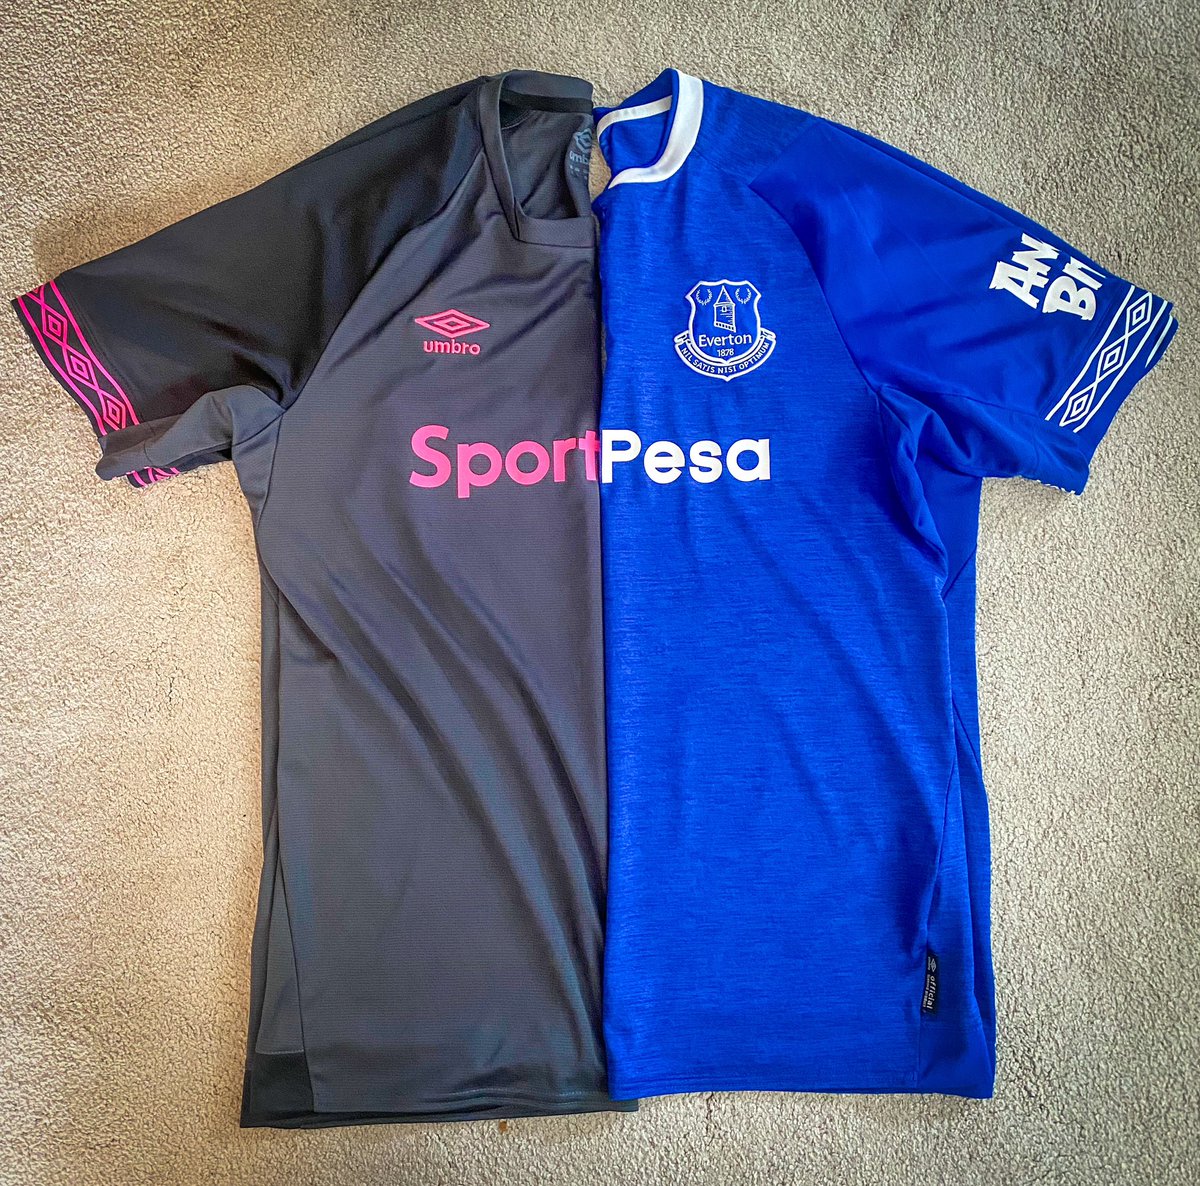 When the home & away templates match. 

The 2005/06 & 2018/19 kits which I think are my favour combo we’ve had in matching templates. 

@Everton @UmbroUK @ChangBeerUK #Everton #EFC #EvertonFC #FootballKit @classicshirts